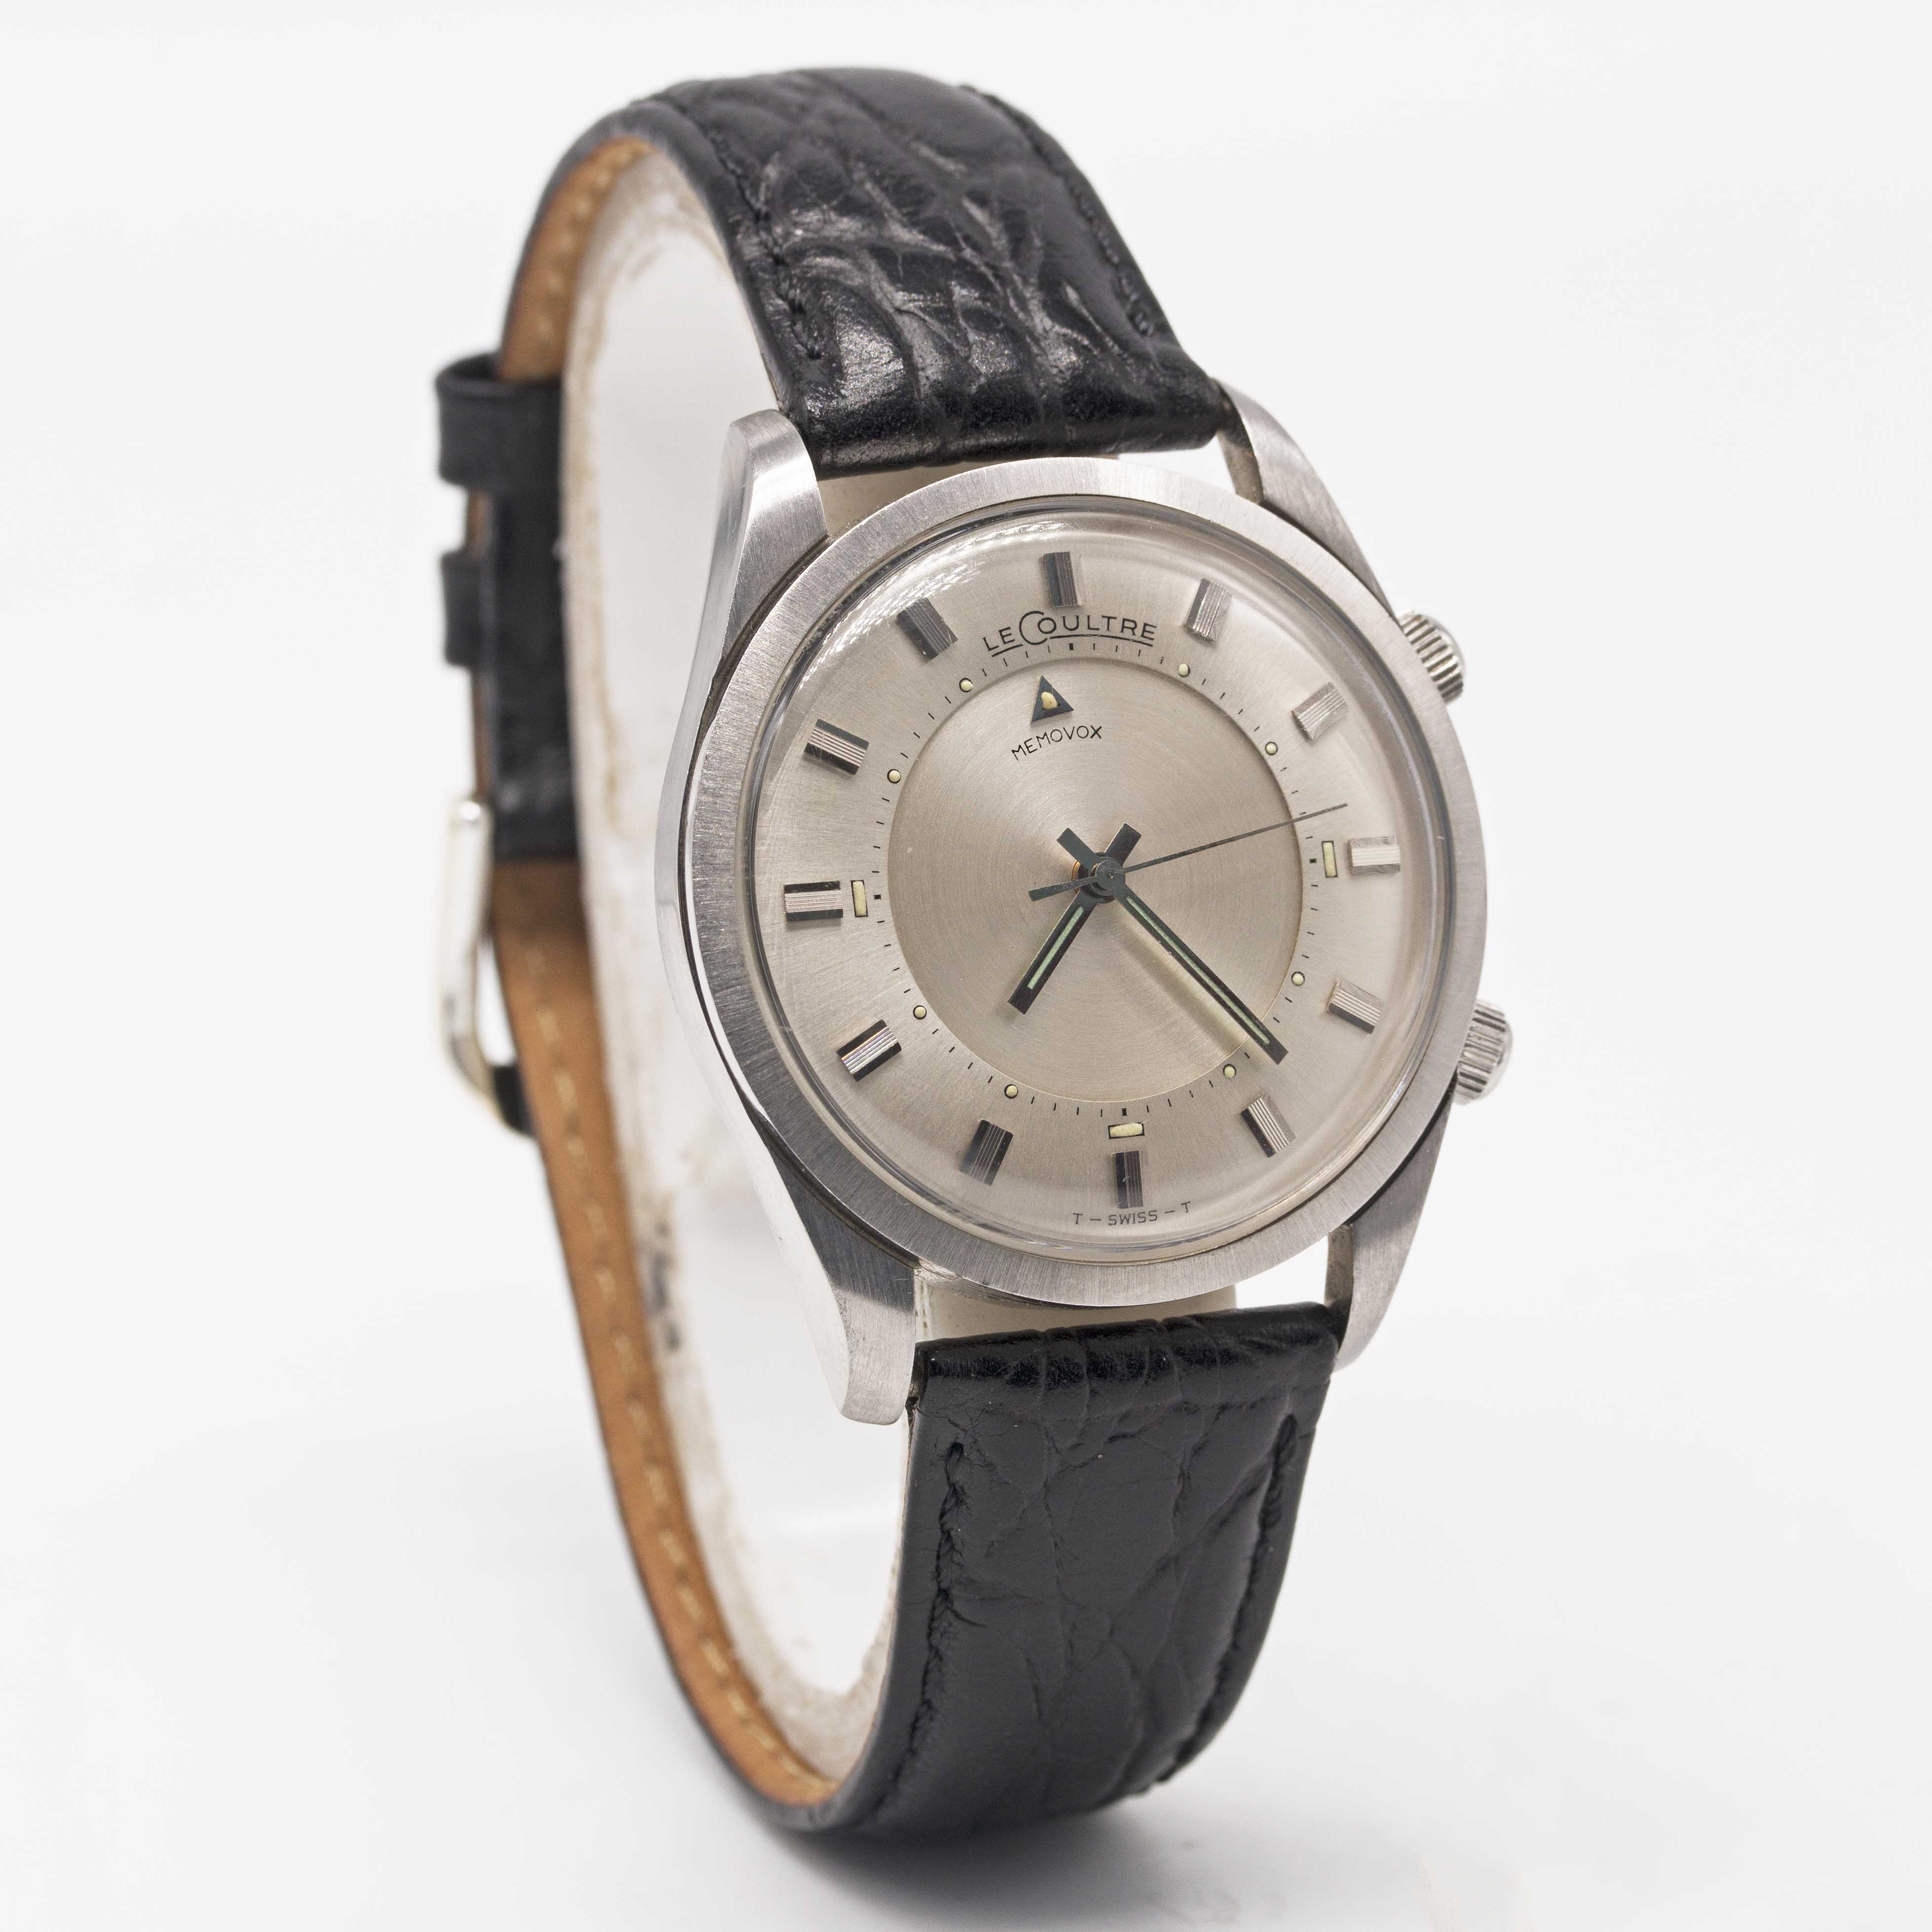 A GENTLEMAN'S STAINLESS STEEL LECOULTRE MEMOVOX ALARM WRIST WATCH CIRCA 1960s Movement: Manual wind, - Image 4 of 7